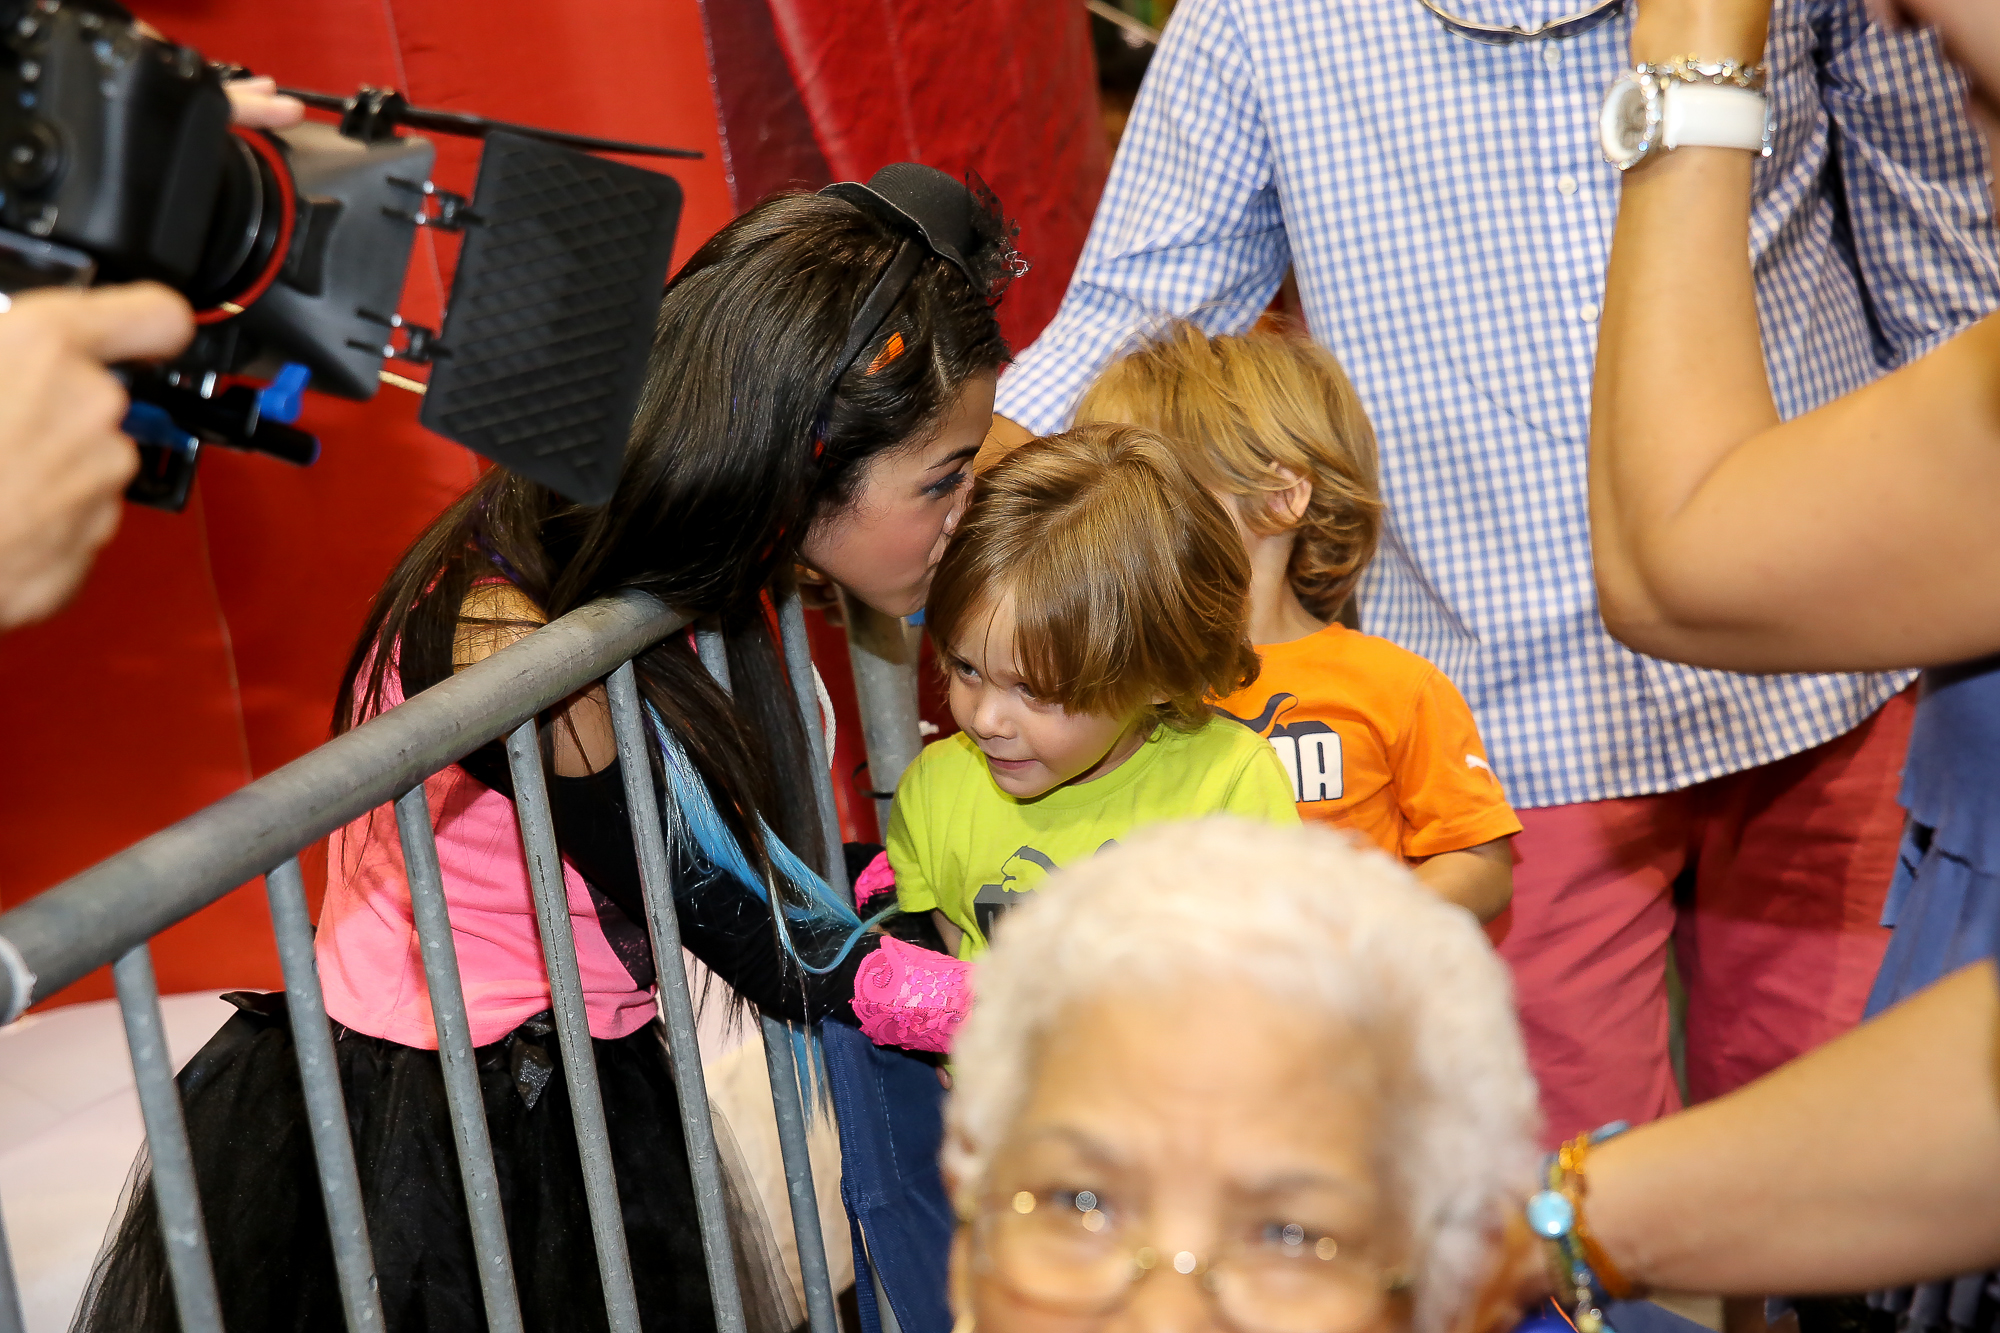 Alanis Sophia after her performance in the Tampa Family Health Fair meeting her fans